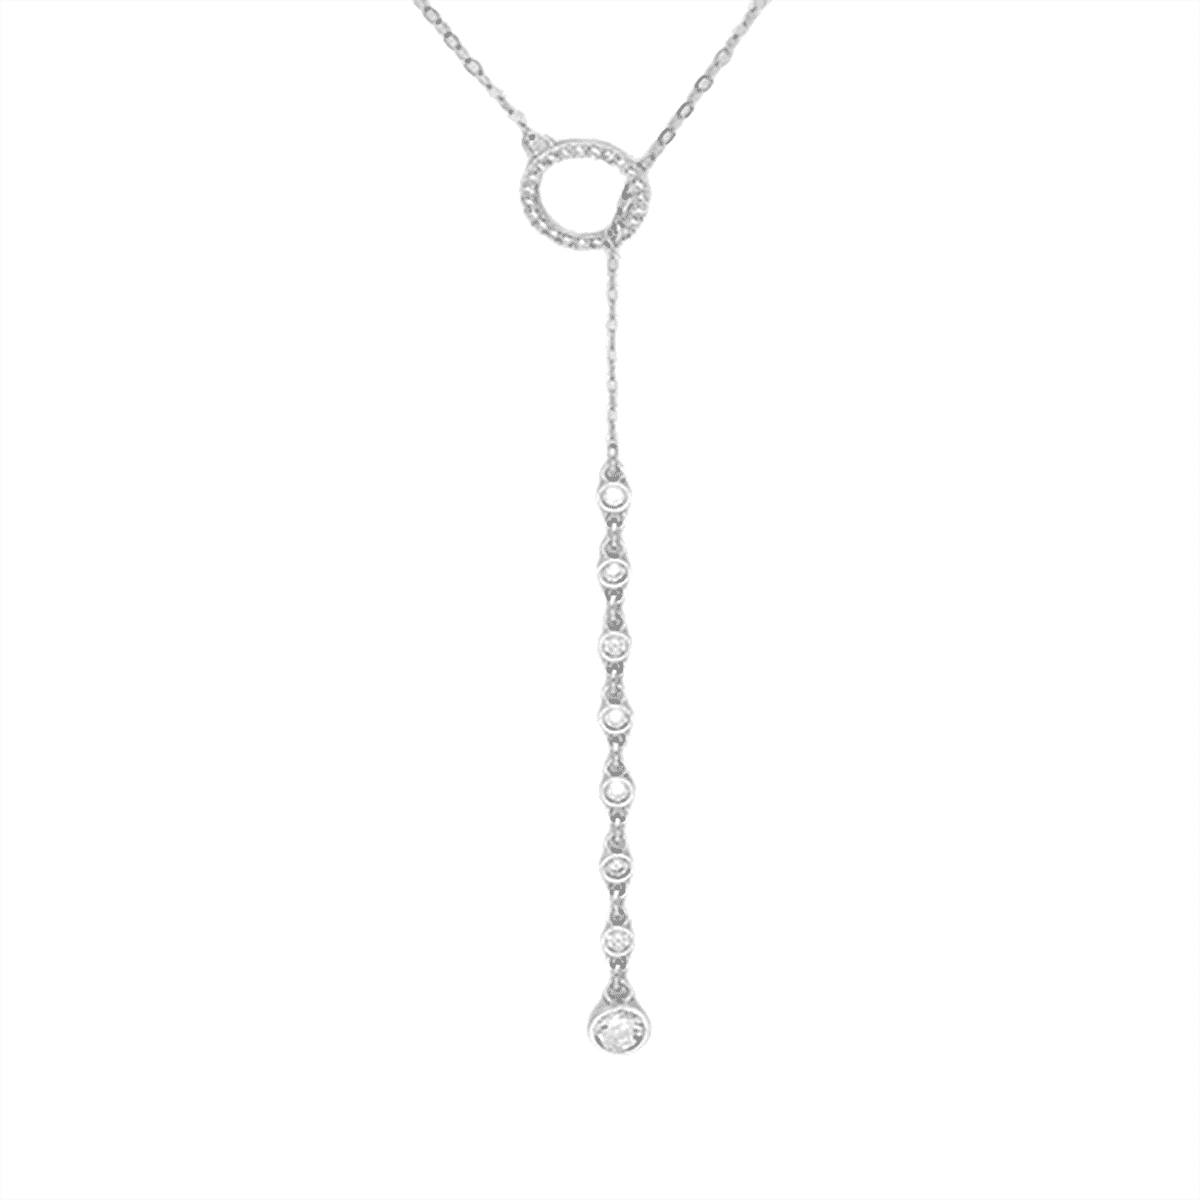 Asfour 925 Sterling Silver Necklace - NT0127